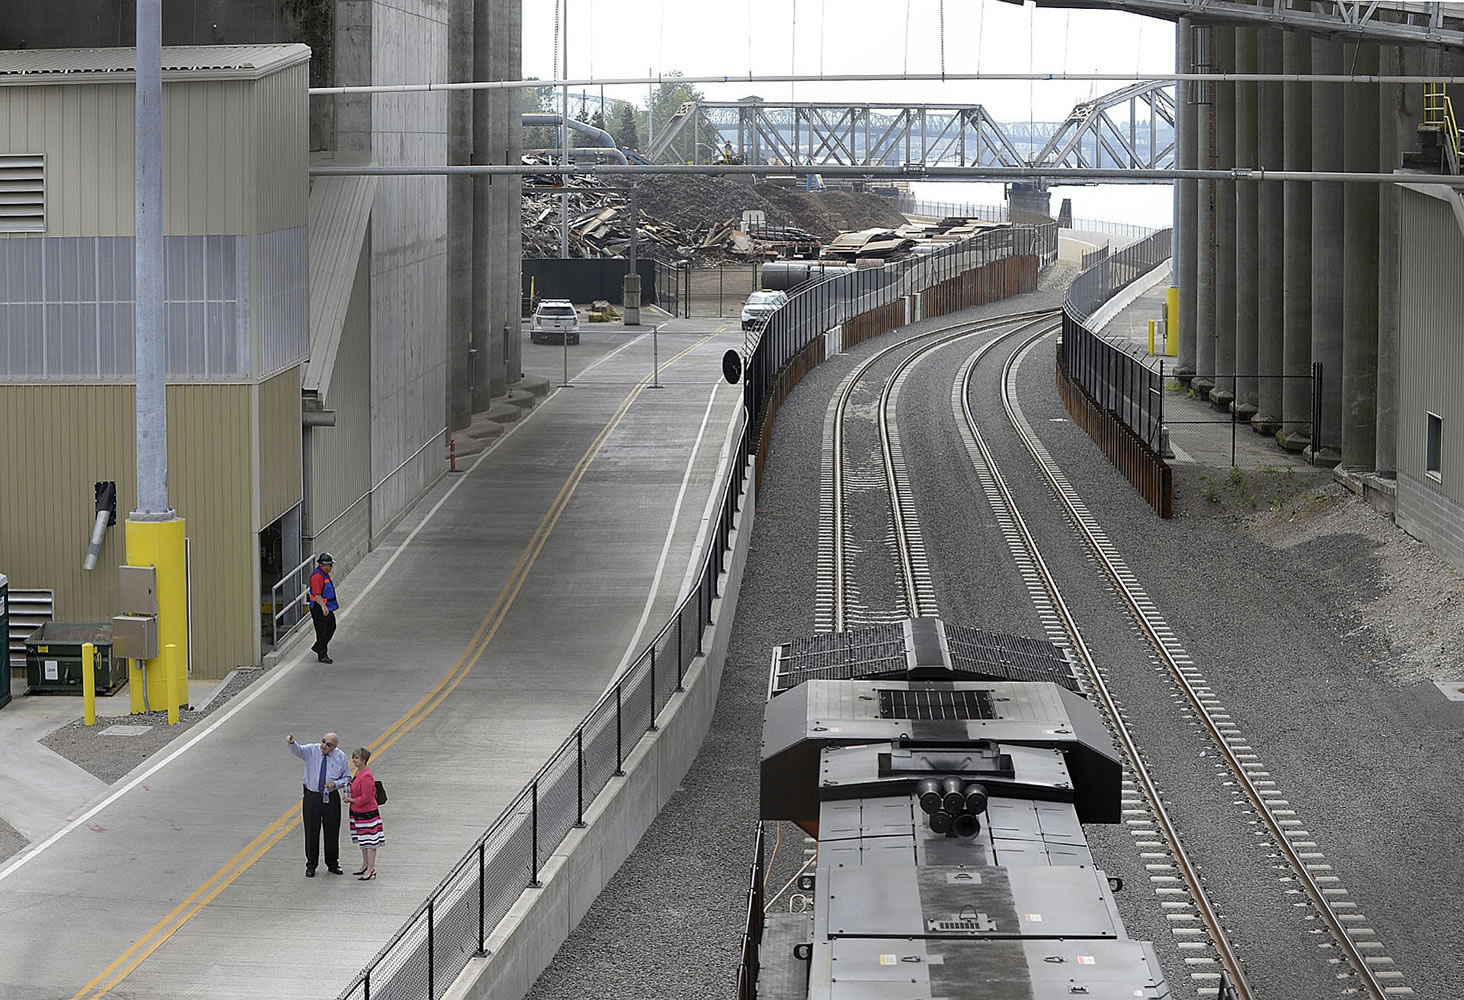 The Port of Vancouver on Aug. 13 celebrated the completion of a new $30 million rail entrance project. Dubbed the &quot;trench,&quot; it allows trains to move under the Columbia River Rail Bridge and to avoid conflicts with BNSF Railway and Union Pacific Railroad mainlines.